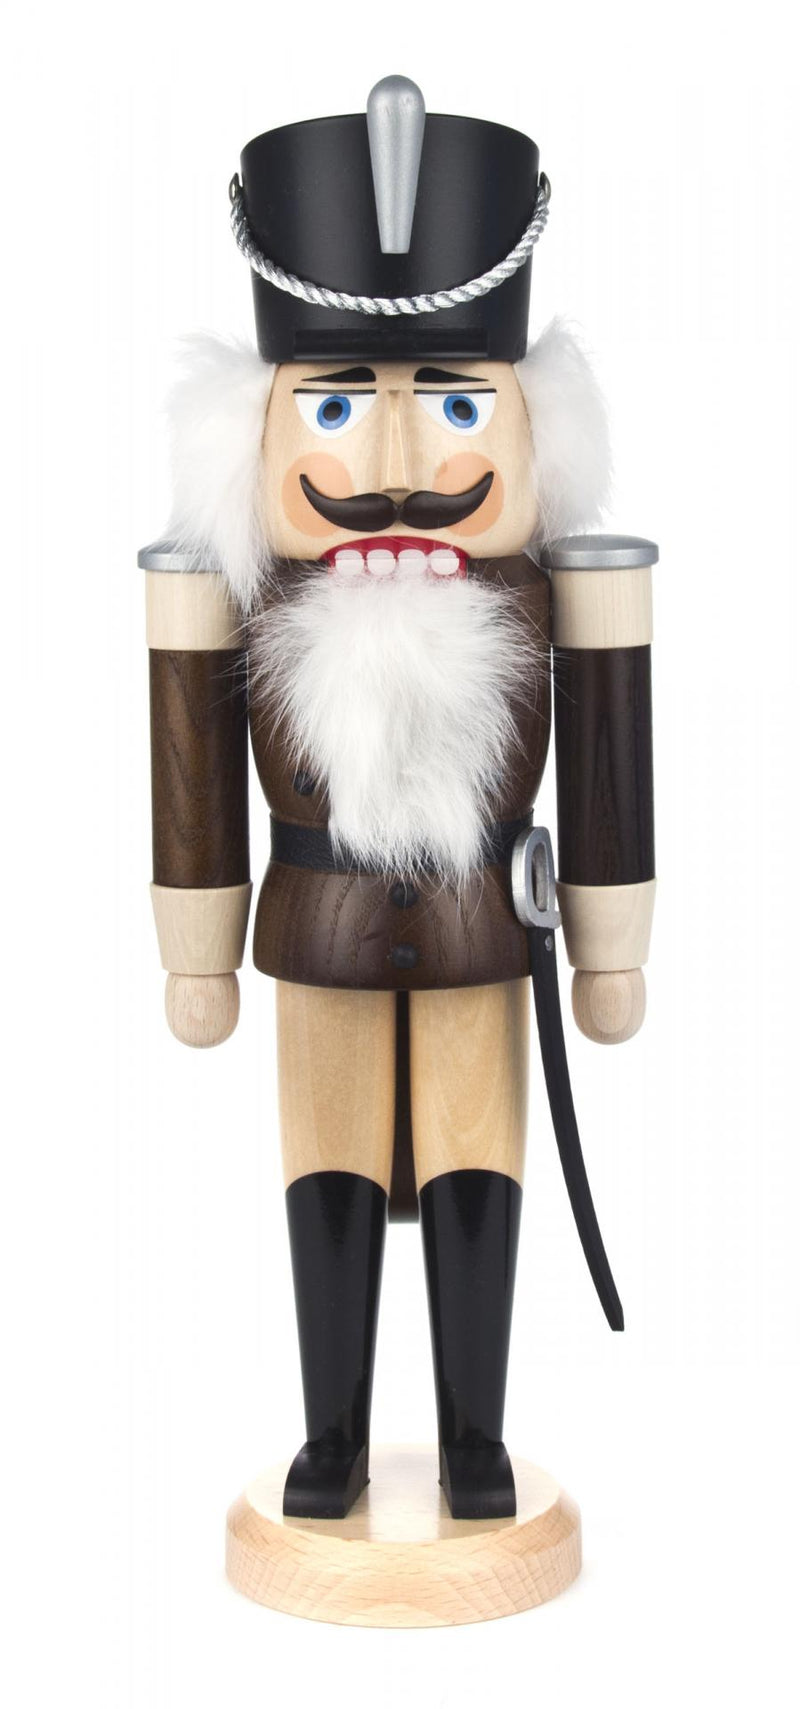 003/212BR - Soldier Nutcracker with Brown & Silver Accents